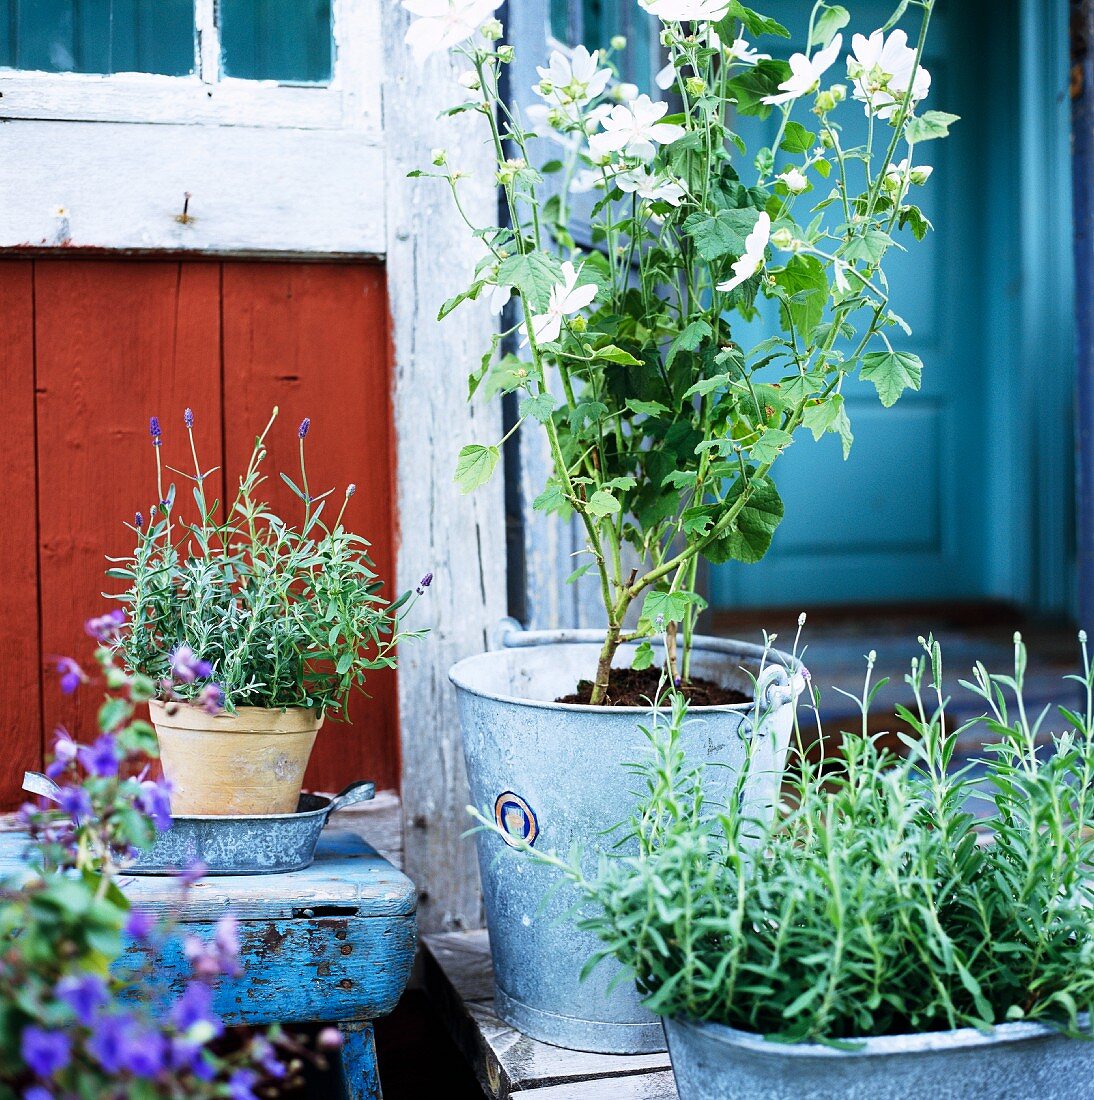 Herb pots in front of a rustic wooden house